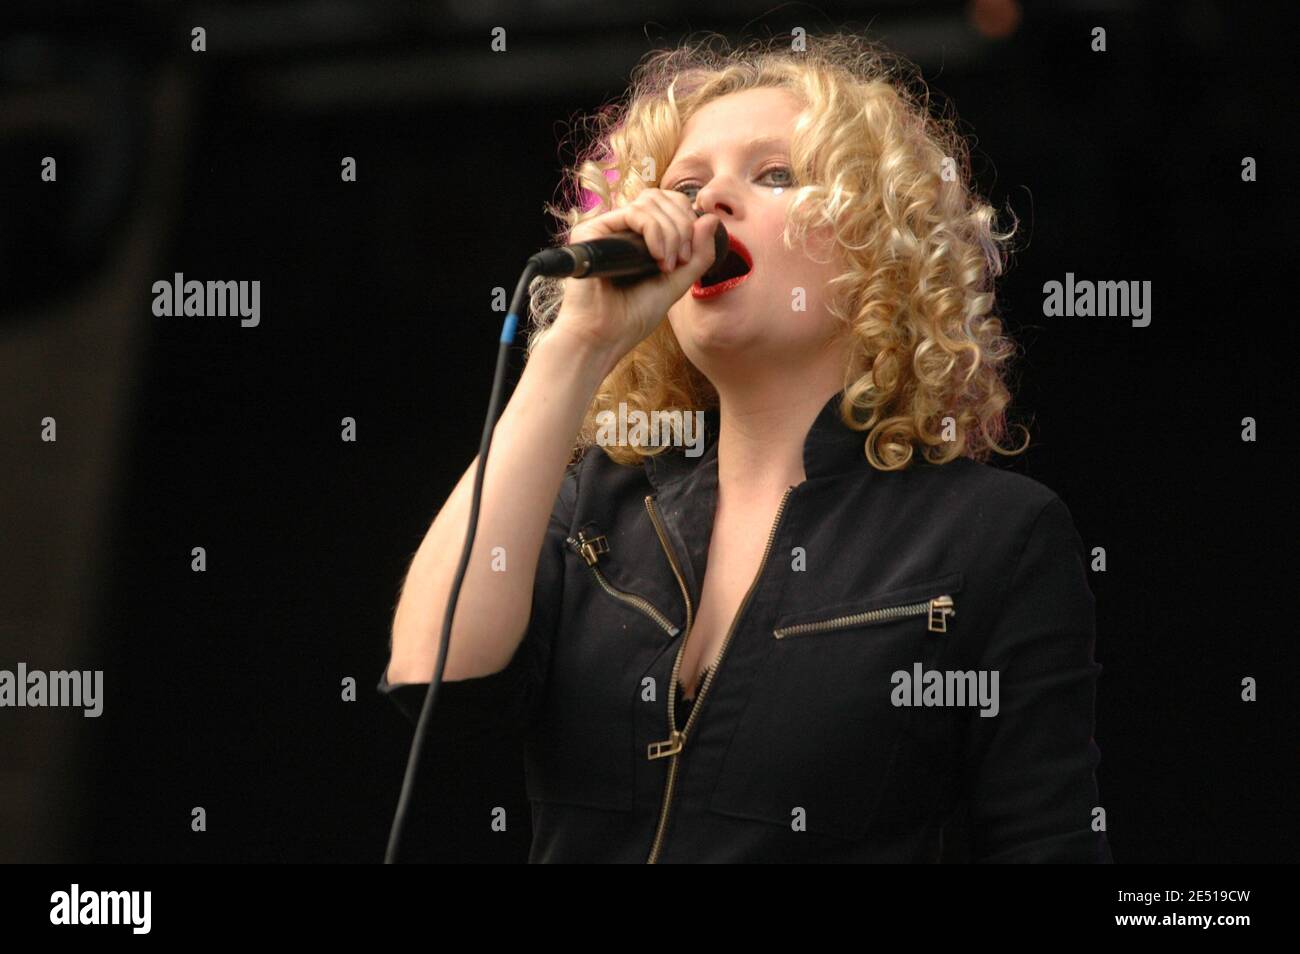 British singer Alison Goldfrapp performs live on stage during 3rd edition of 'Rock en Seine' music festival, in Saint-Cloud near Paris, France, on August 26, 2005. Photo by DS/ABACAPRESS.COM Stock Photo